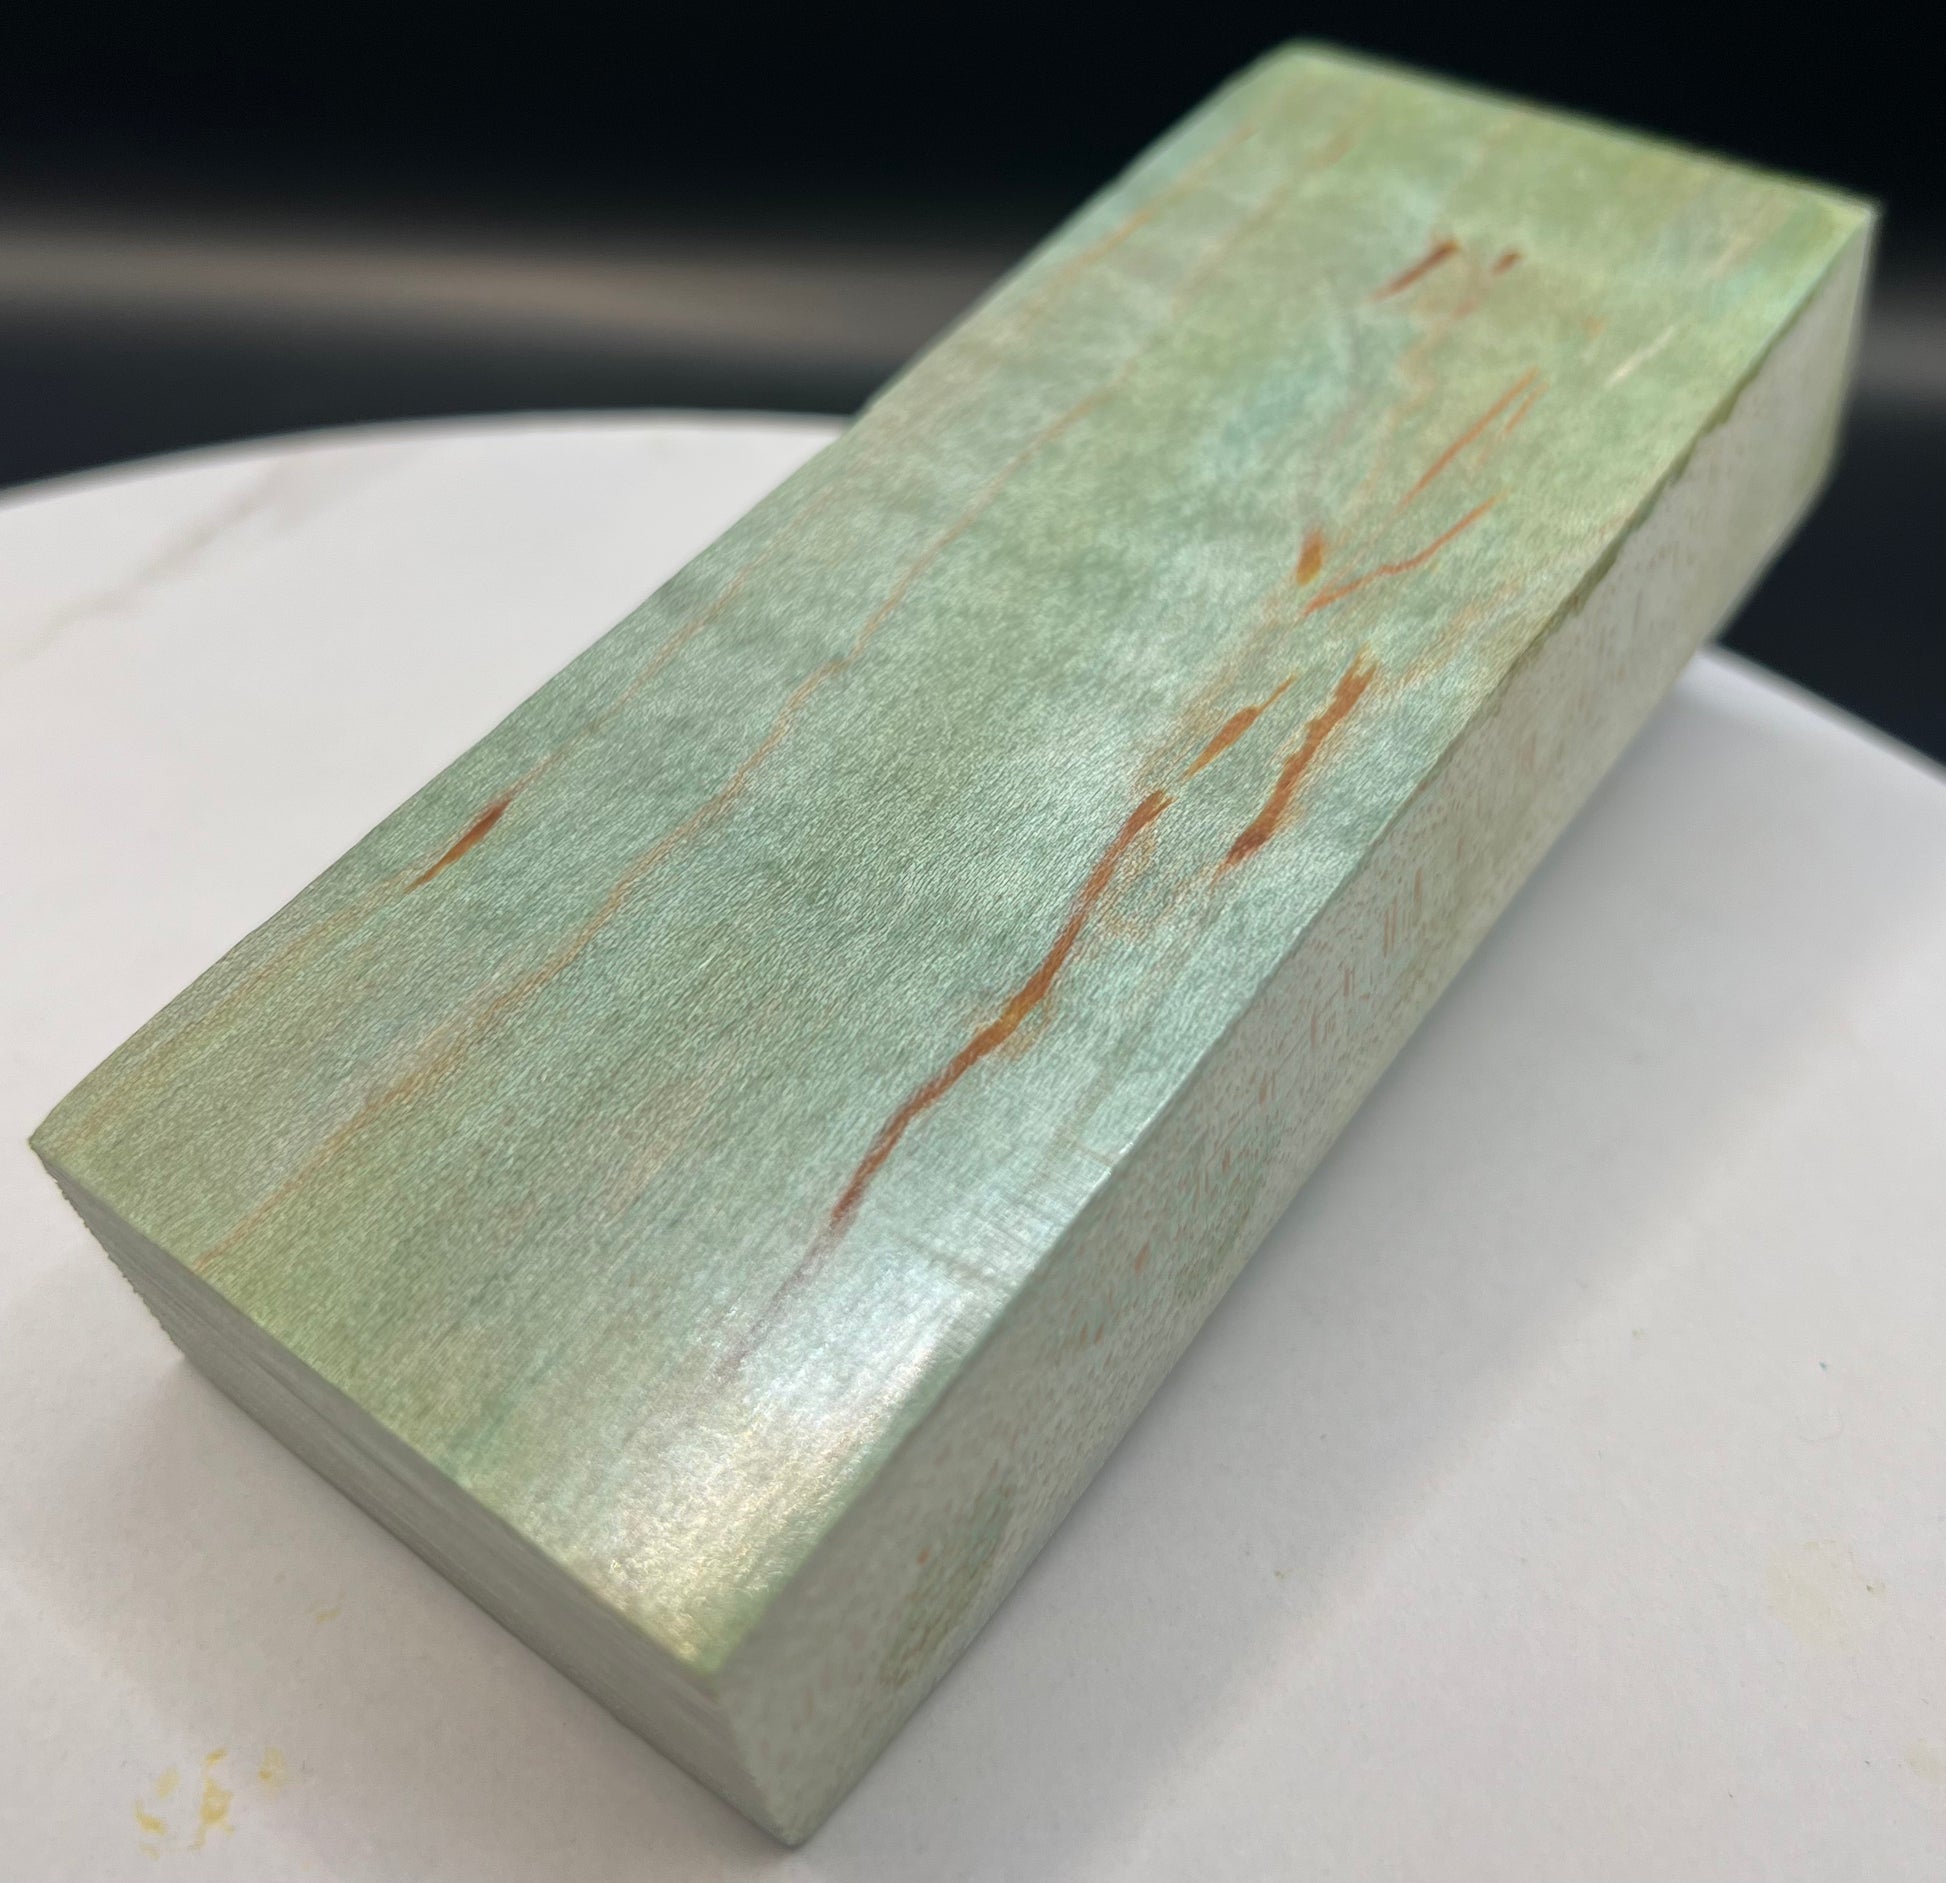 Stabilized Curly Maple Knife Block Teal